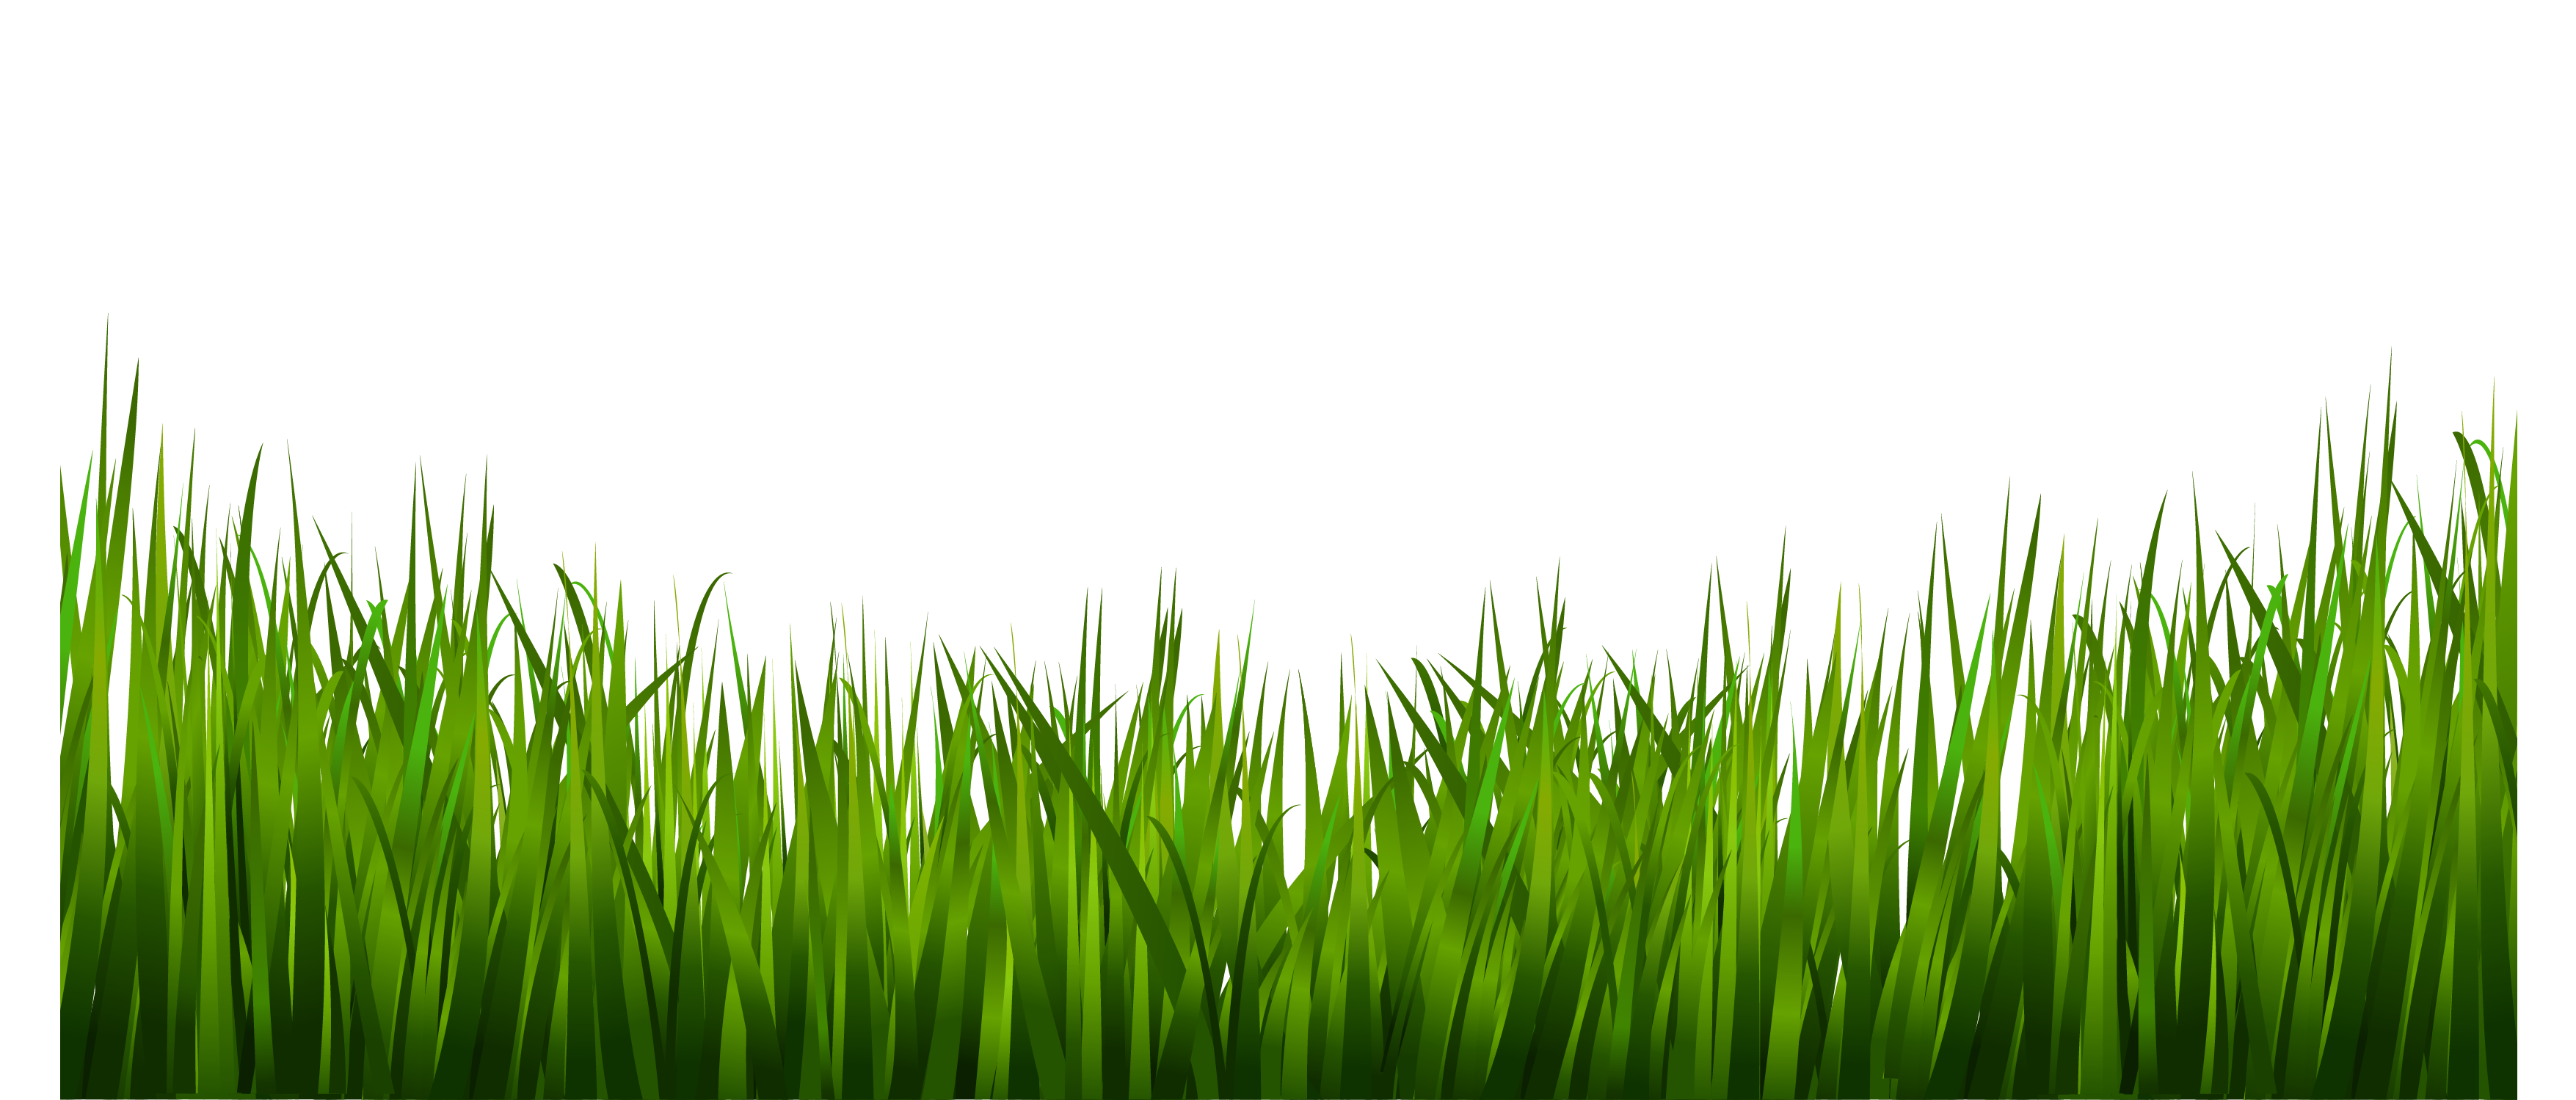 grass png images live ornament tool png only #9209